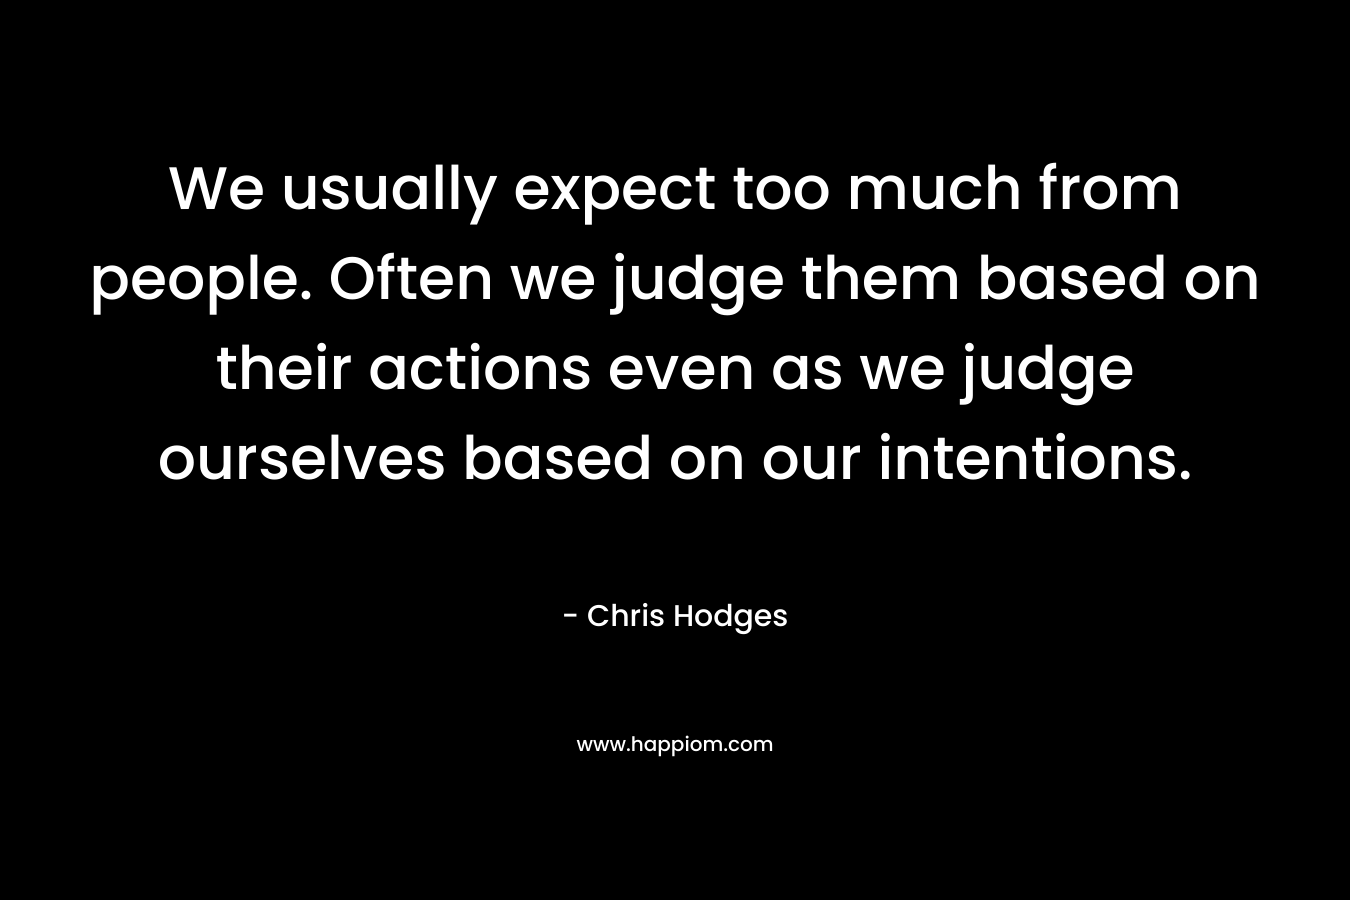 We usually expect too much from people. Often we judge them based on their actions even as we judge ourselves based on our intentions.